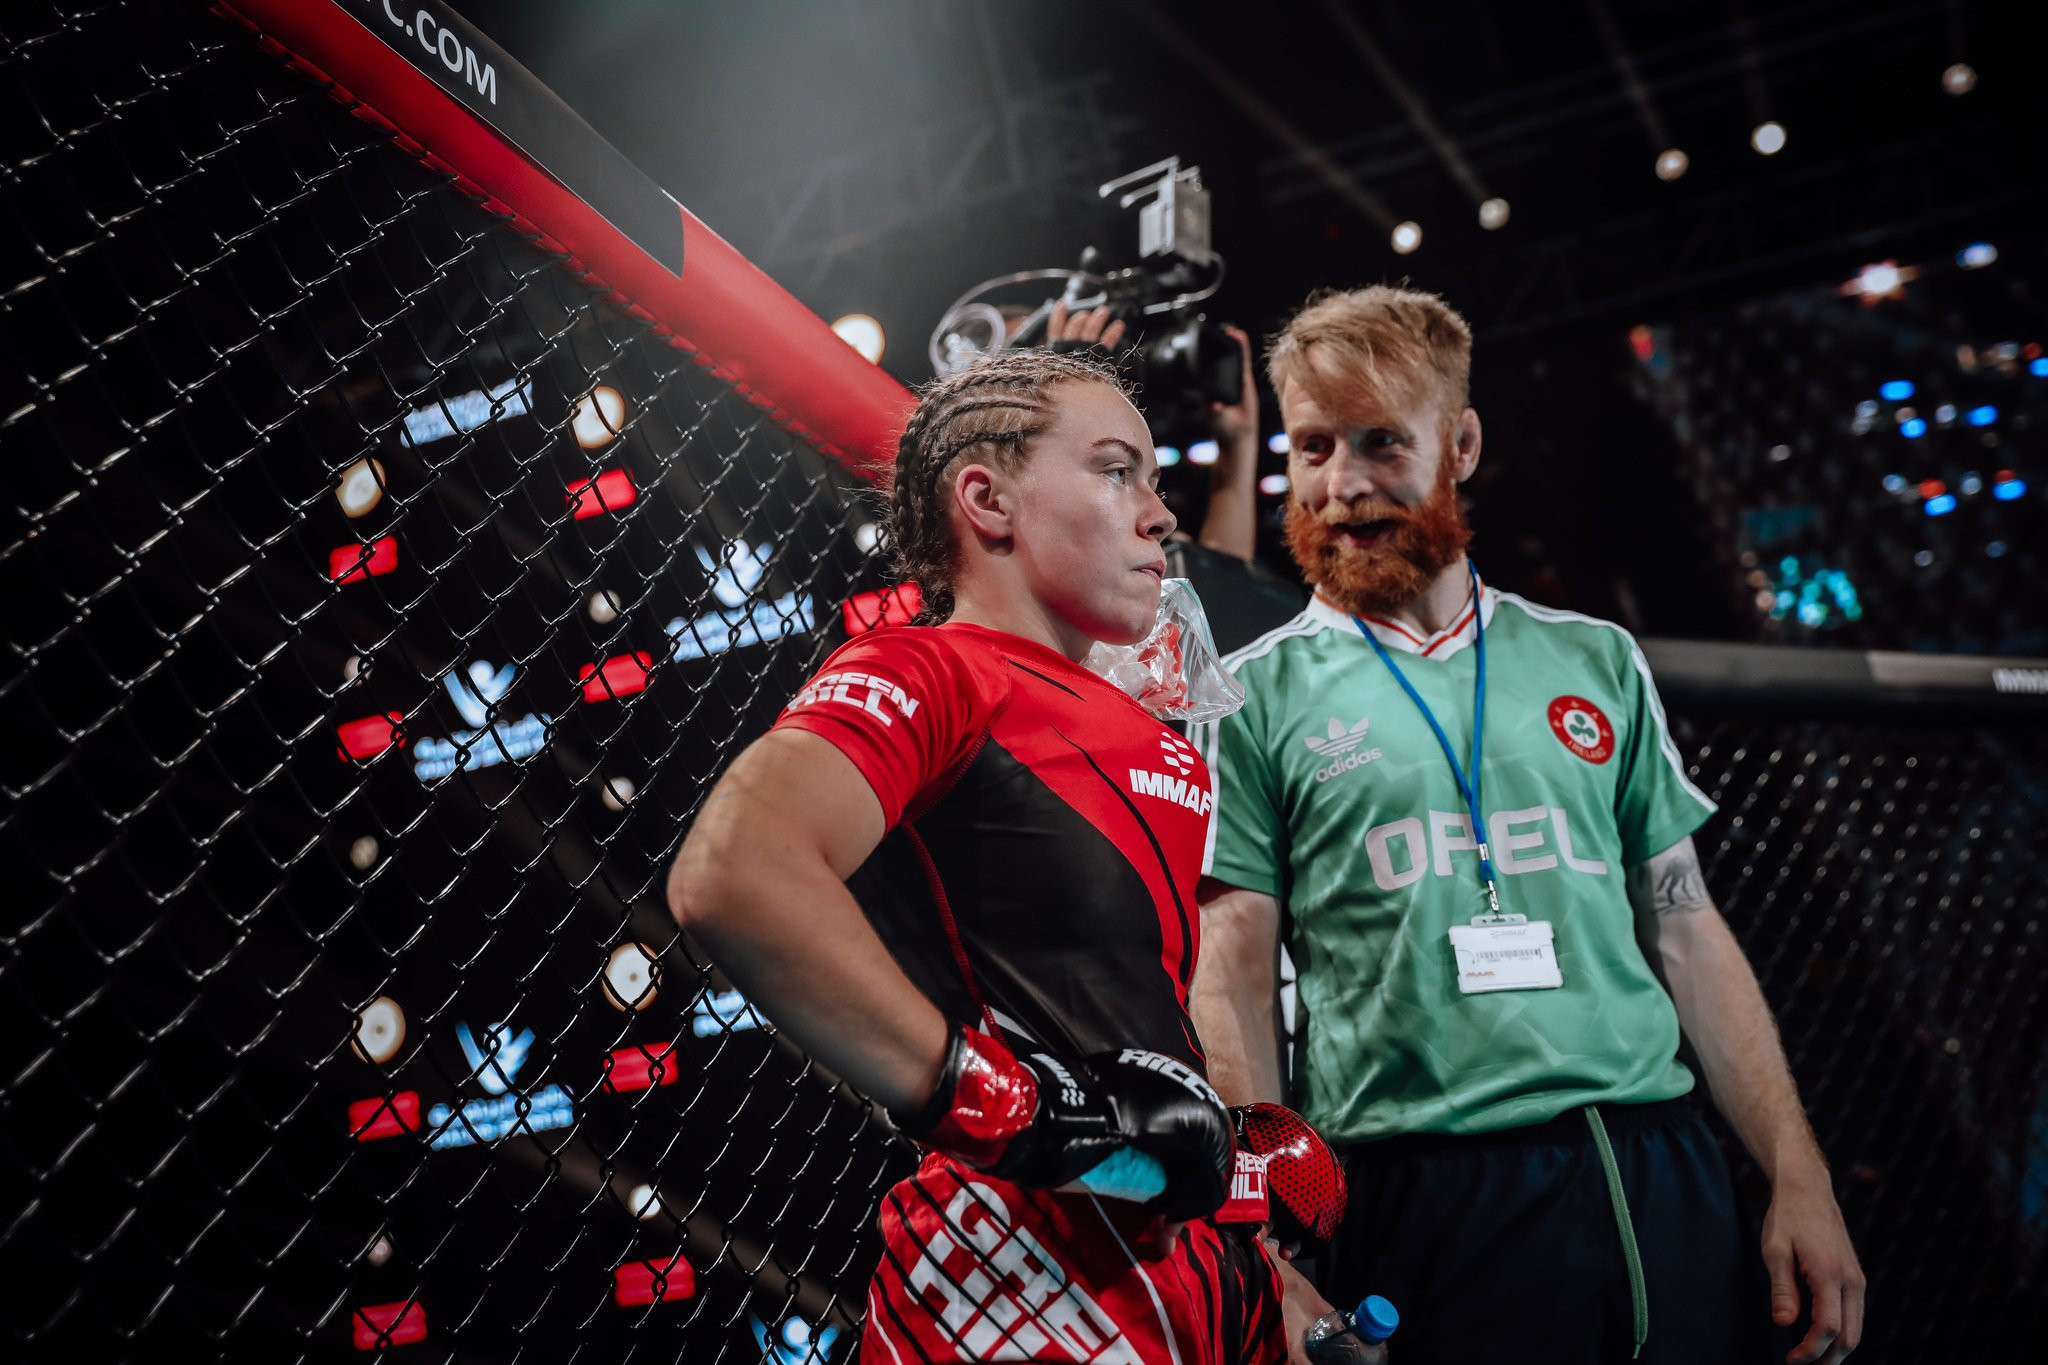 IMMAF World Championships: Day three of competition